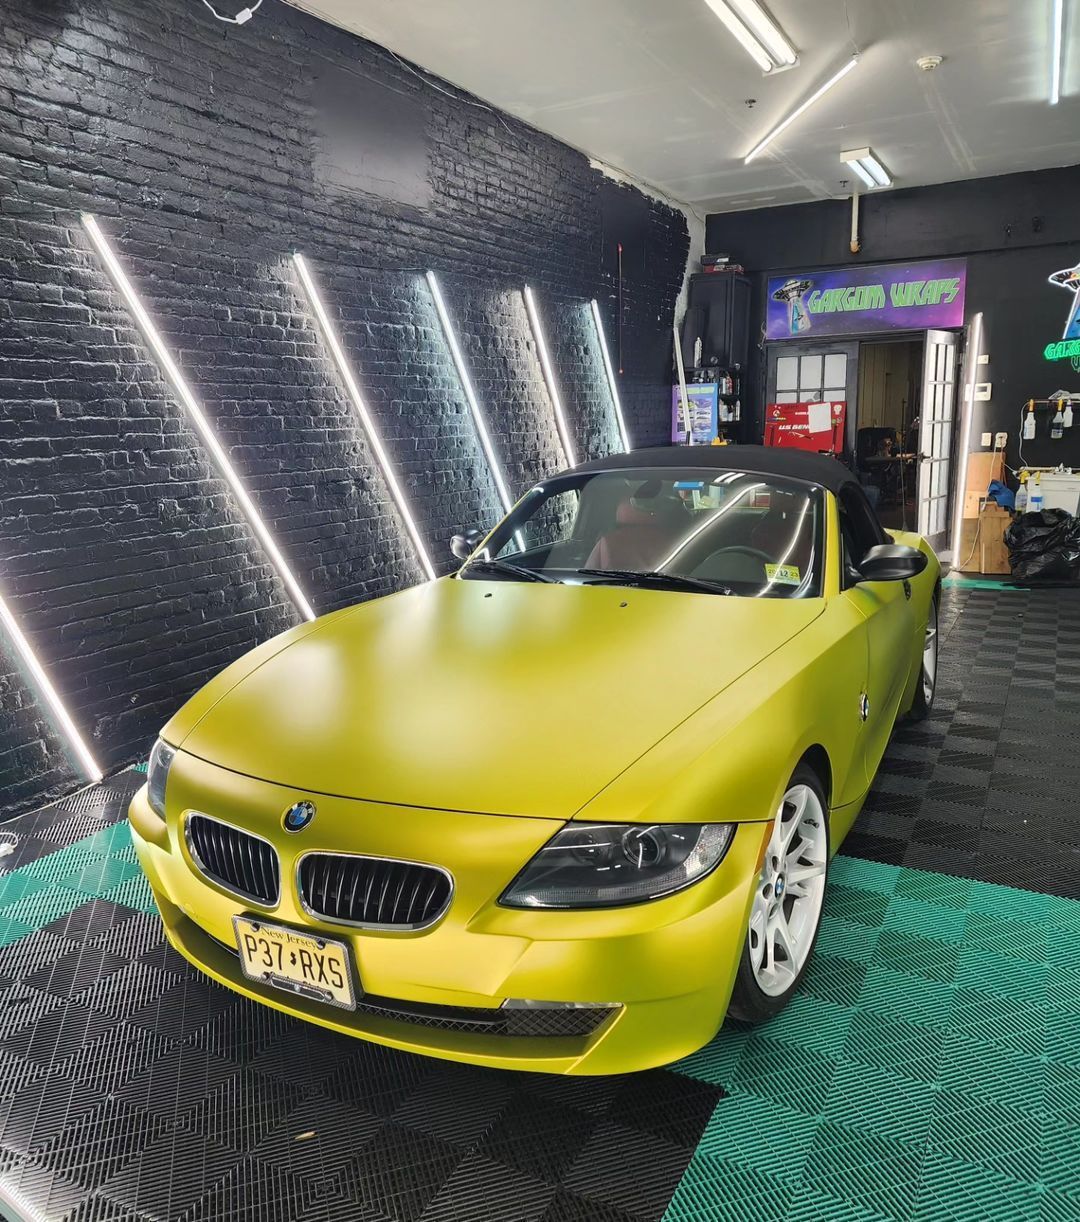 a yellow car is parked in a garage with a sign that says green wraps